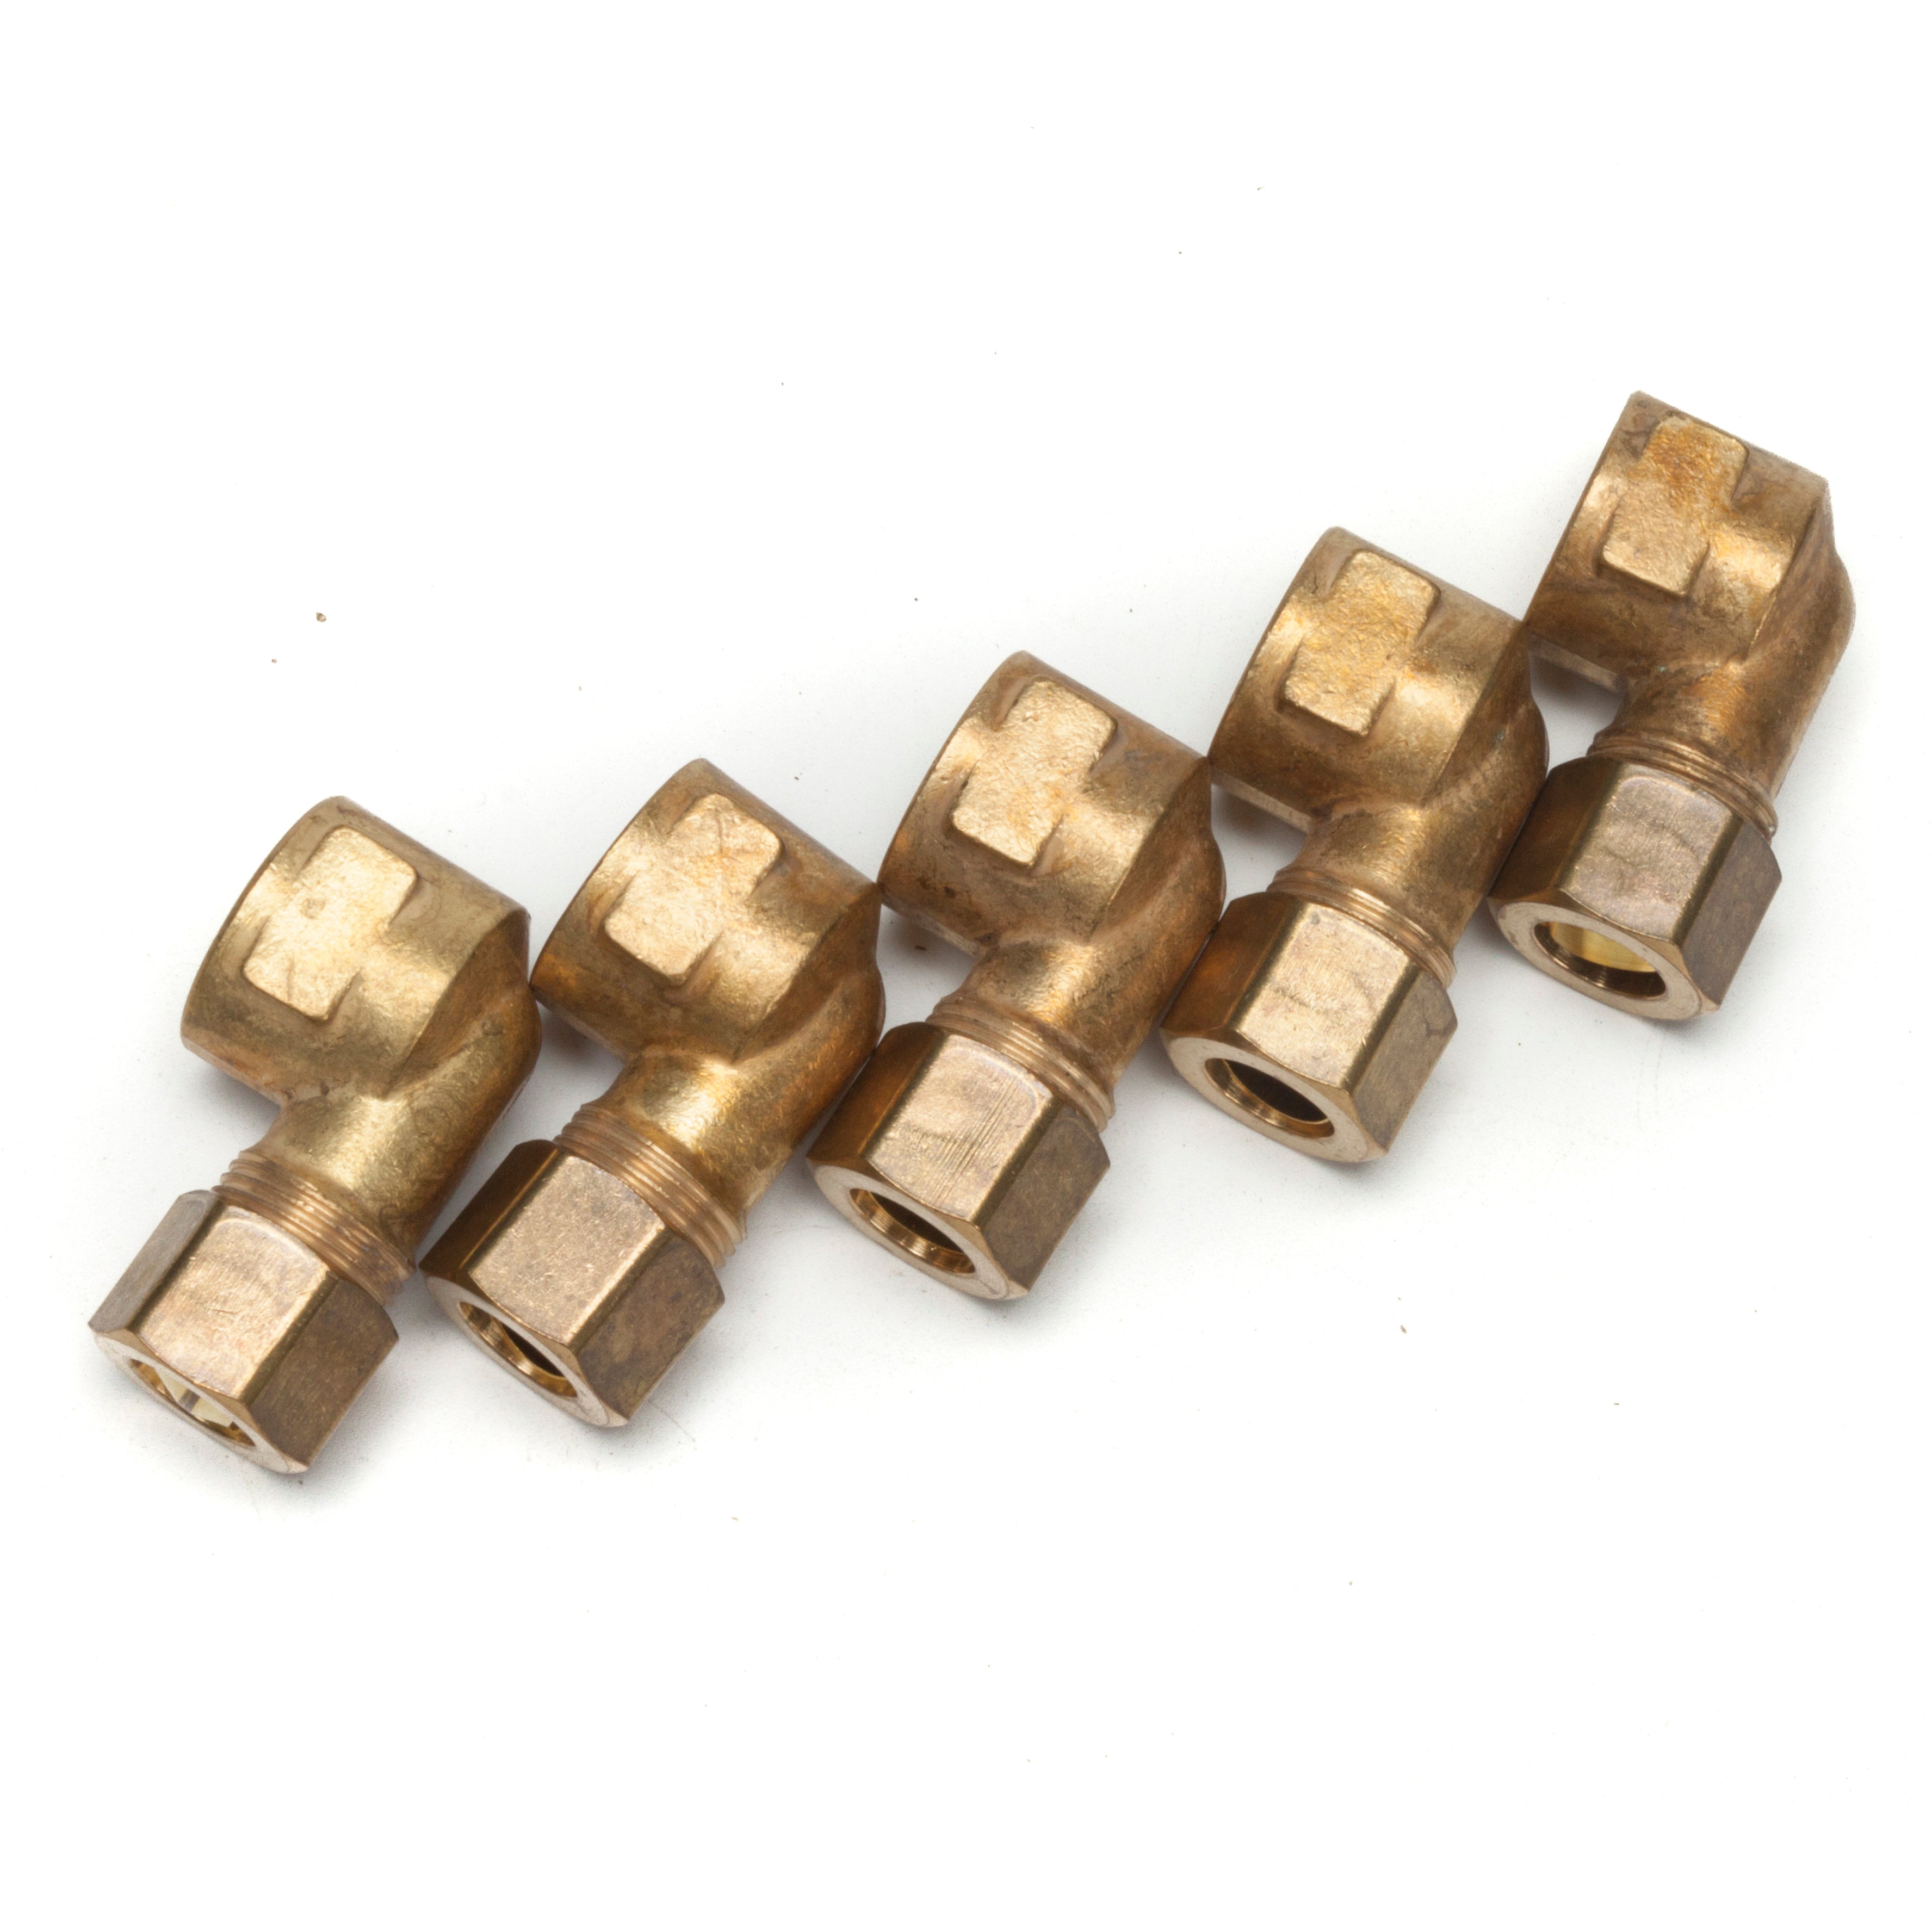 LTWFITTING 3/16-Inch Brass Compression Nut,Brass Compression Fitting(Pack  of 50)